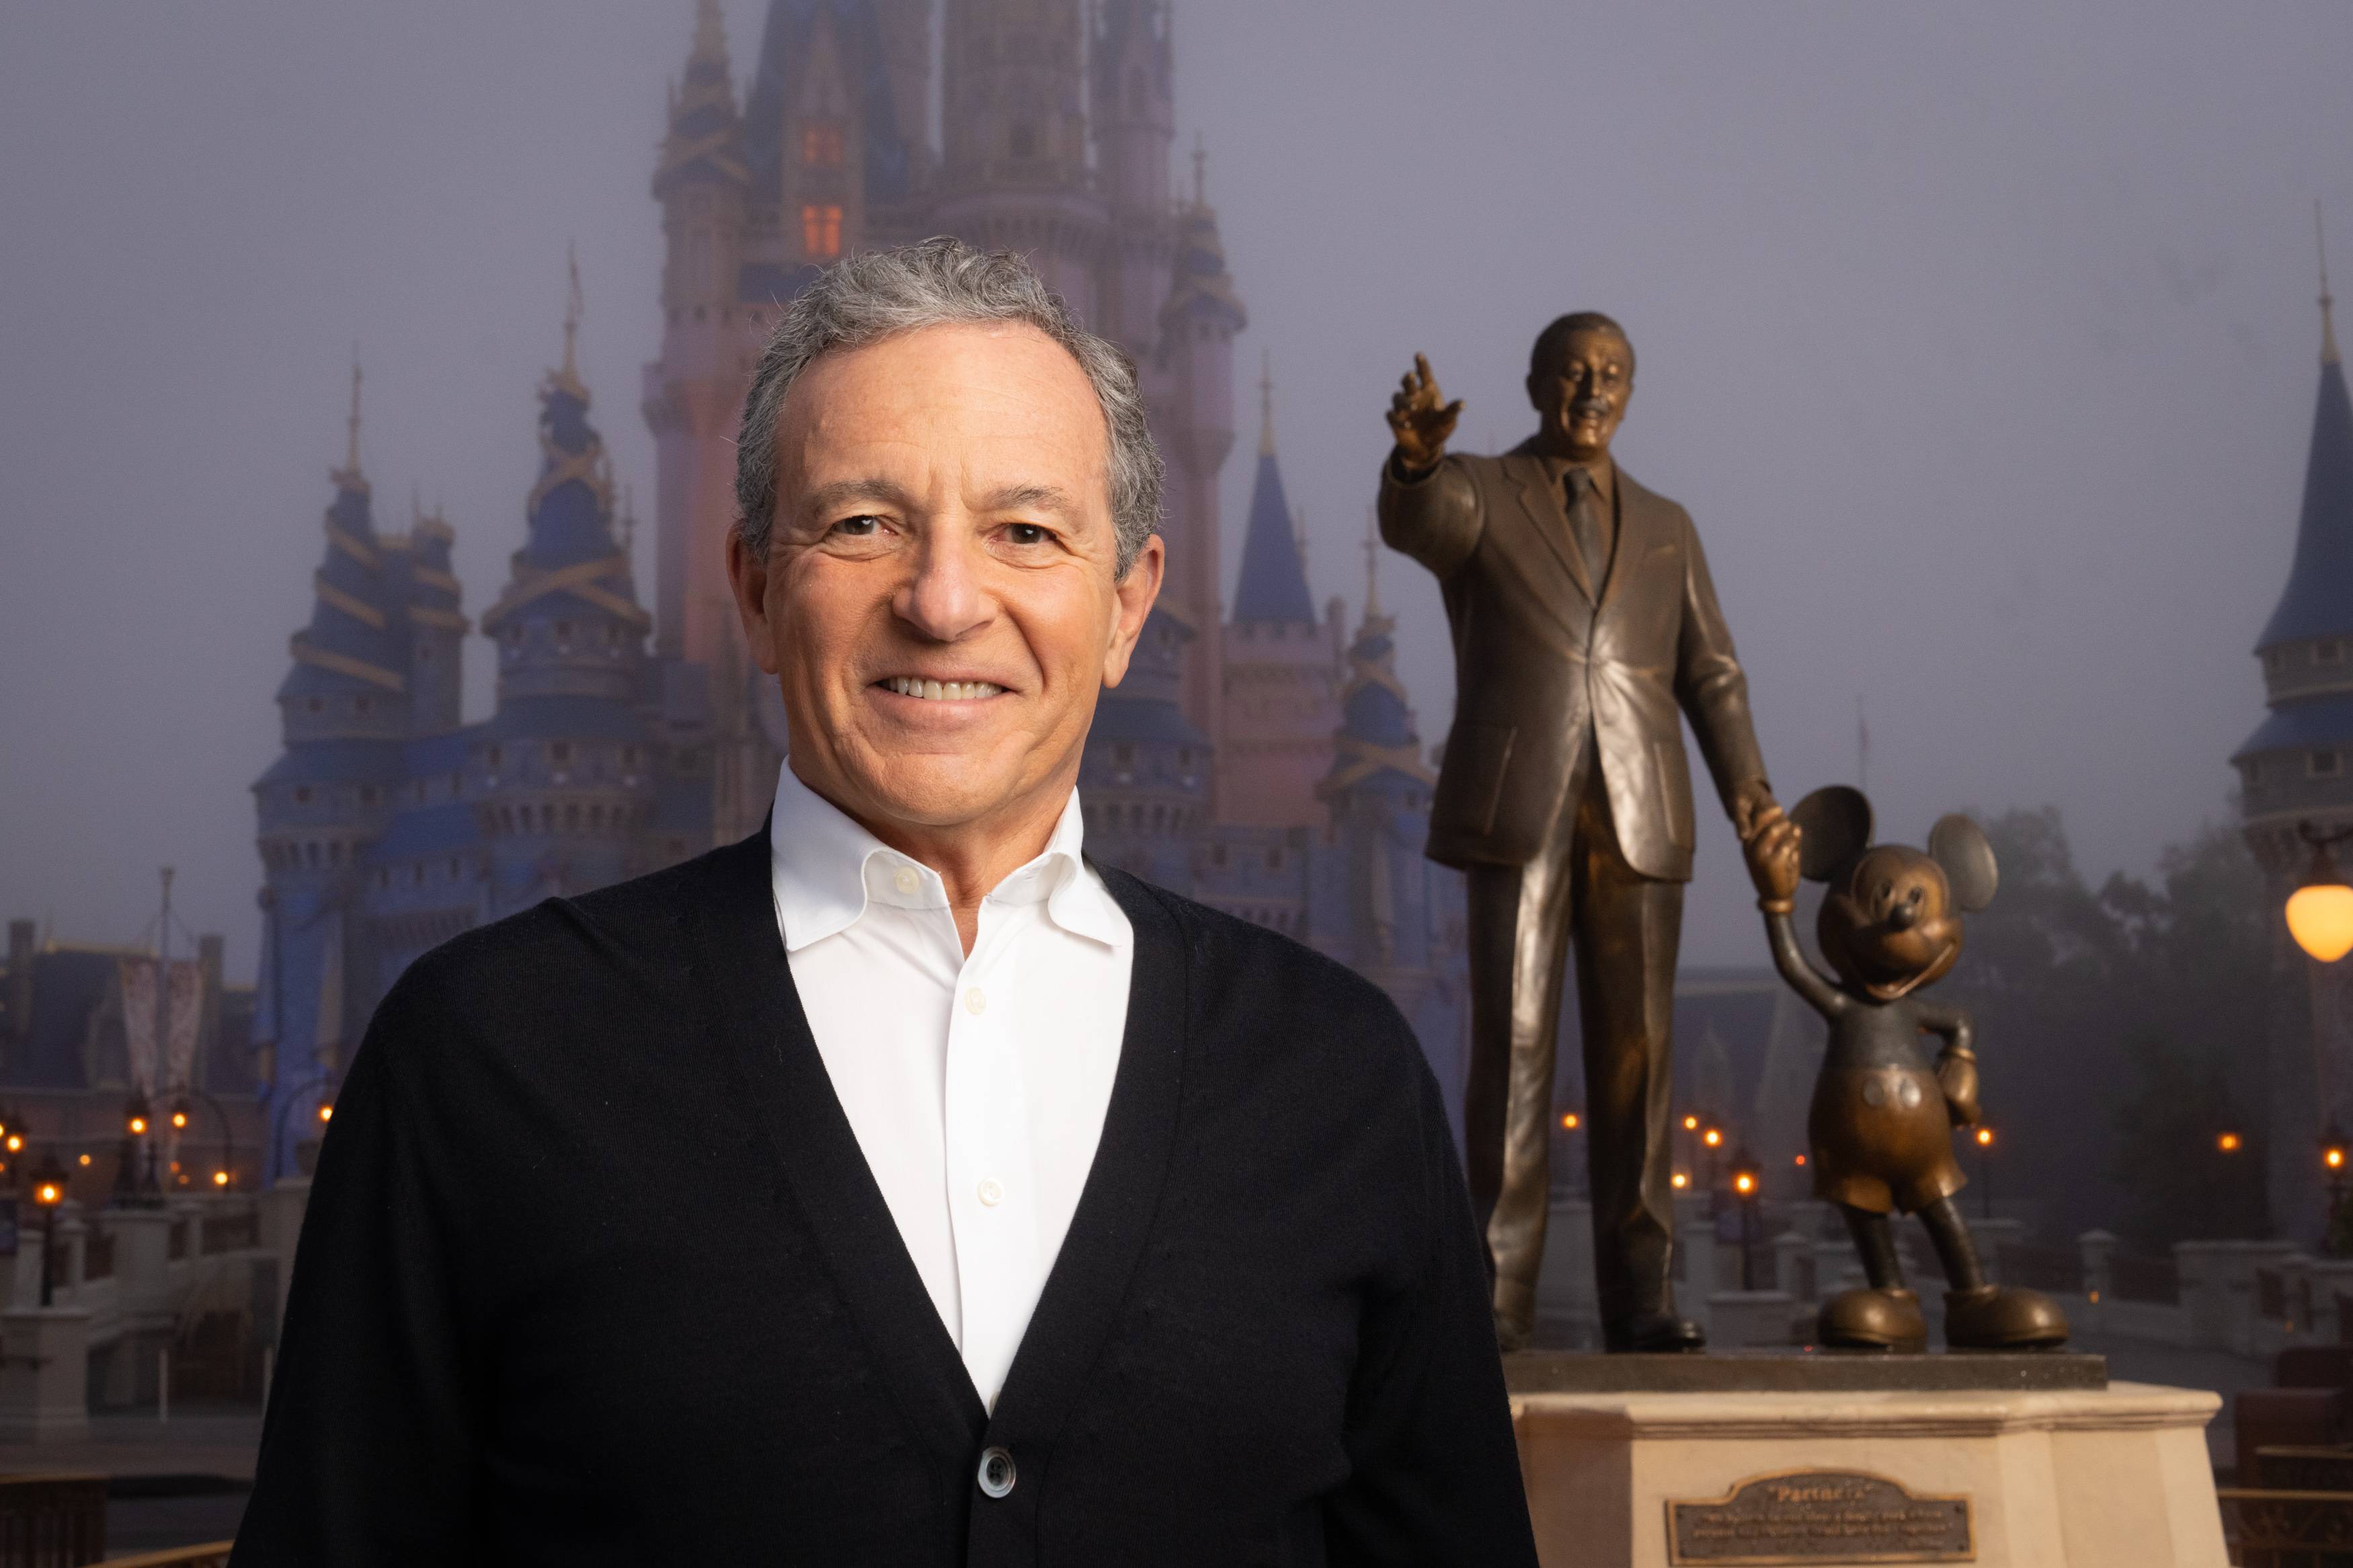 Disney CEO Bob Iger says there has never been a better time to be a Disney fan